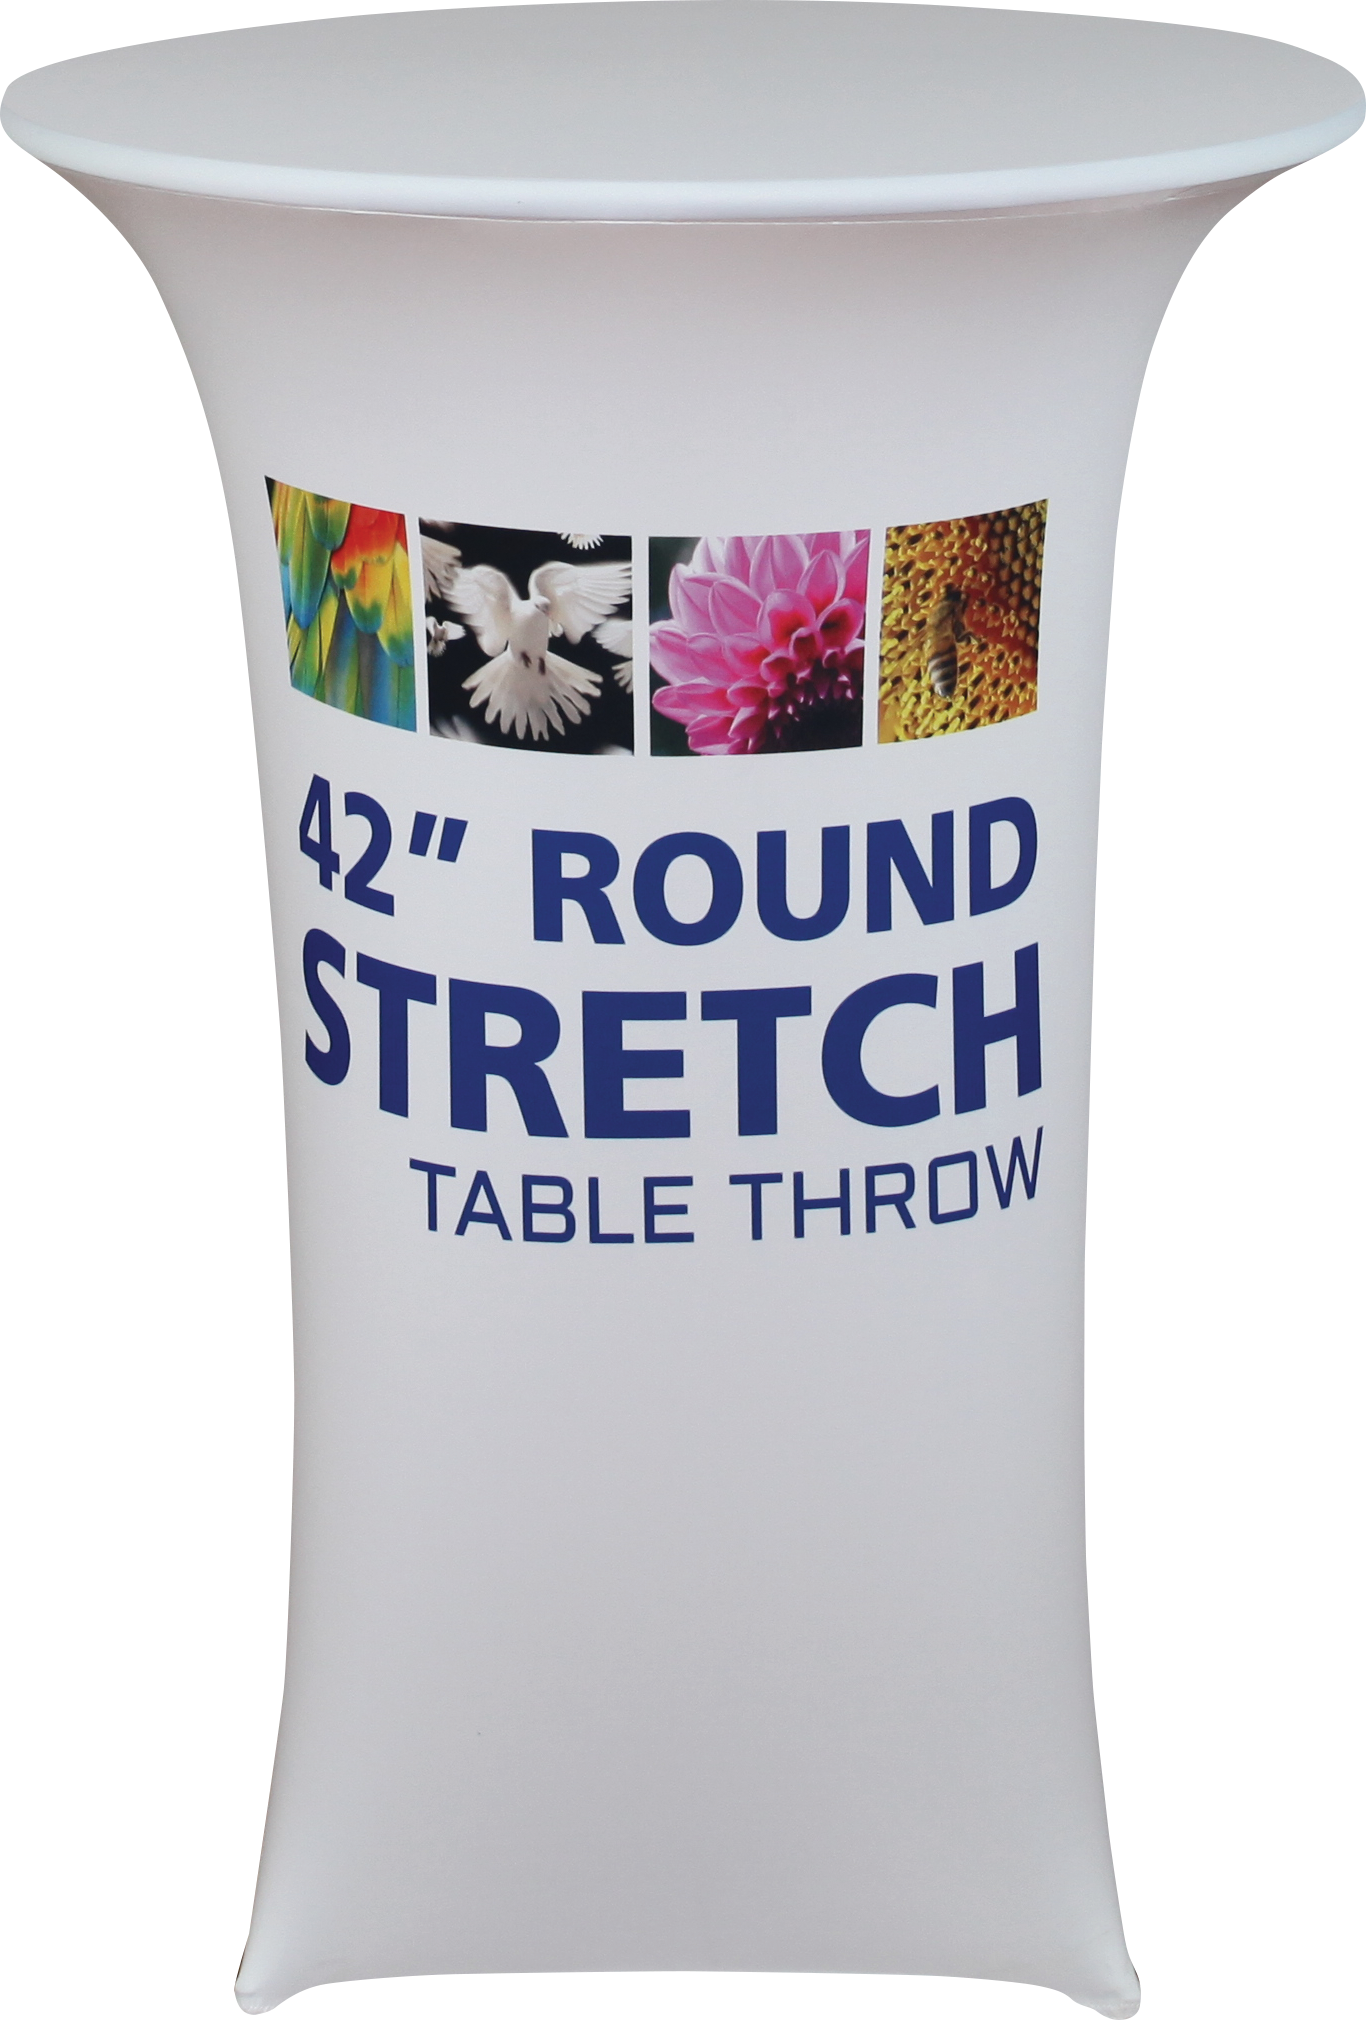 Round- stretch- table throw- table- local- trade show- VA- Undercover Printer